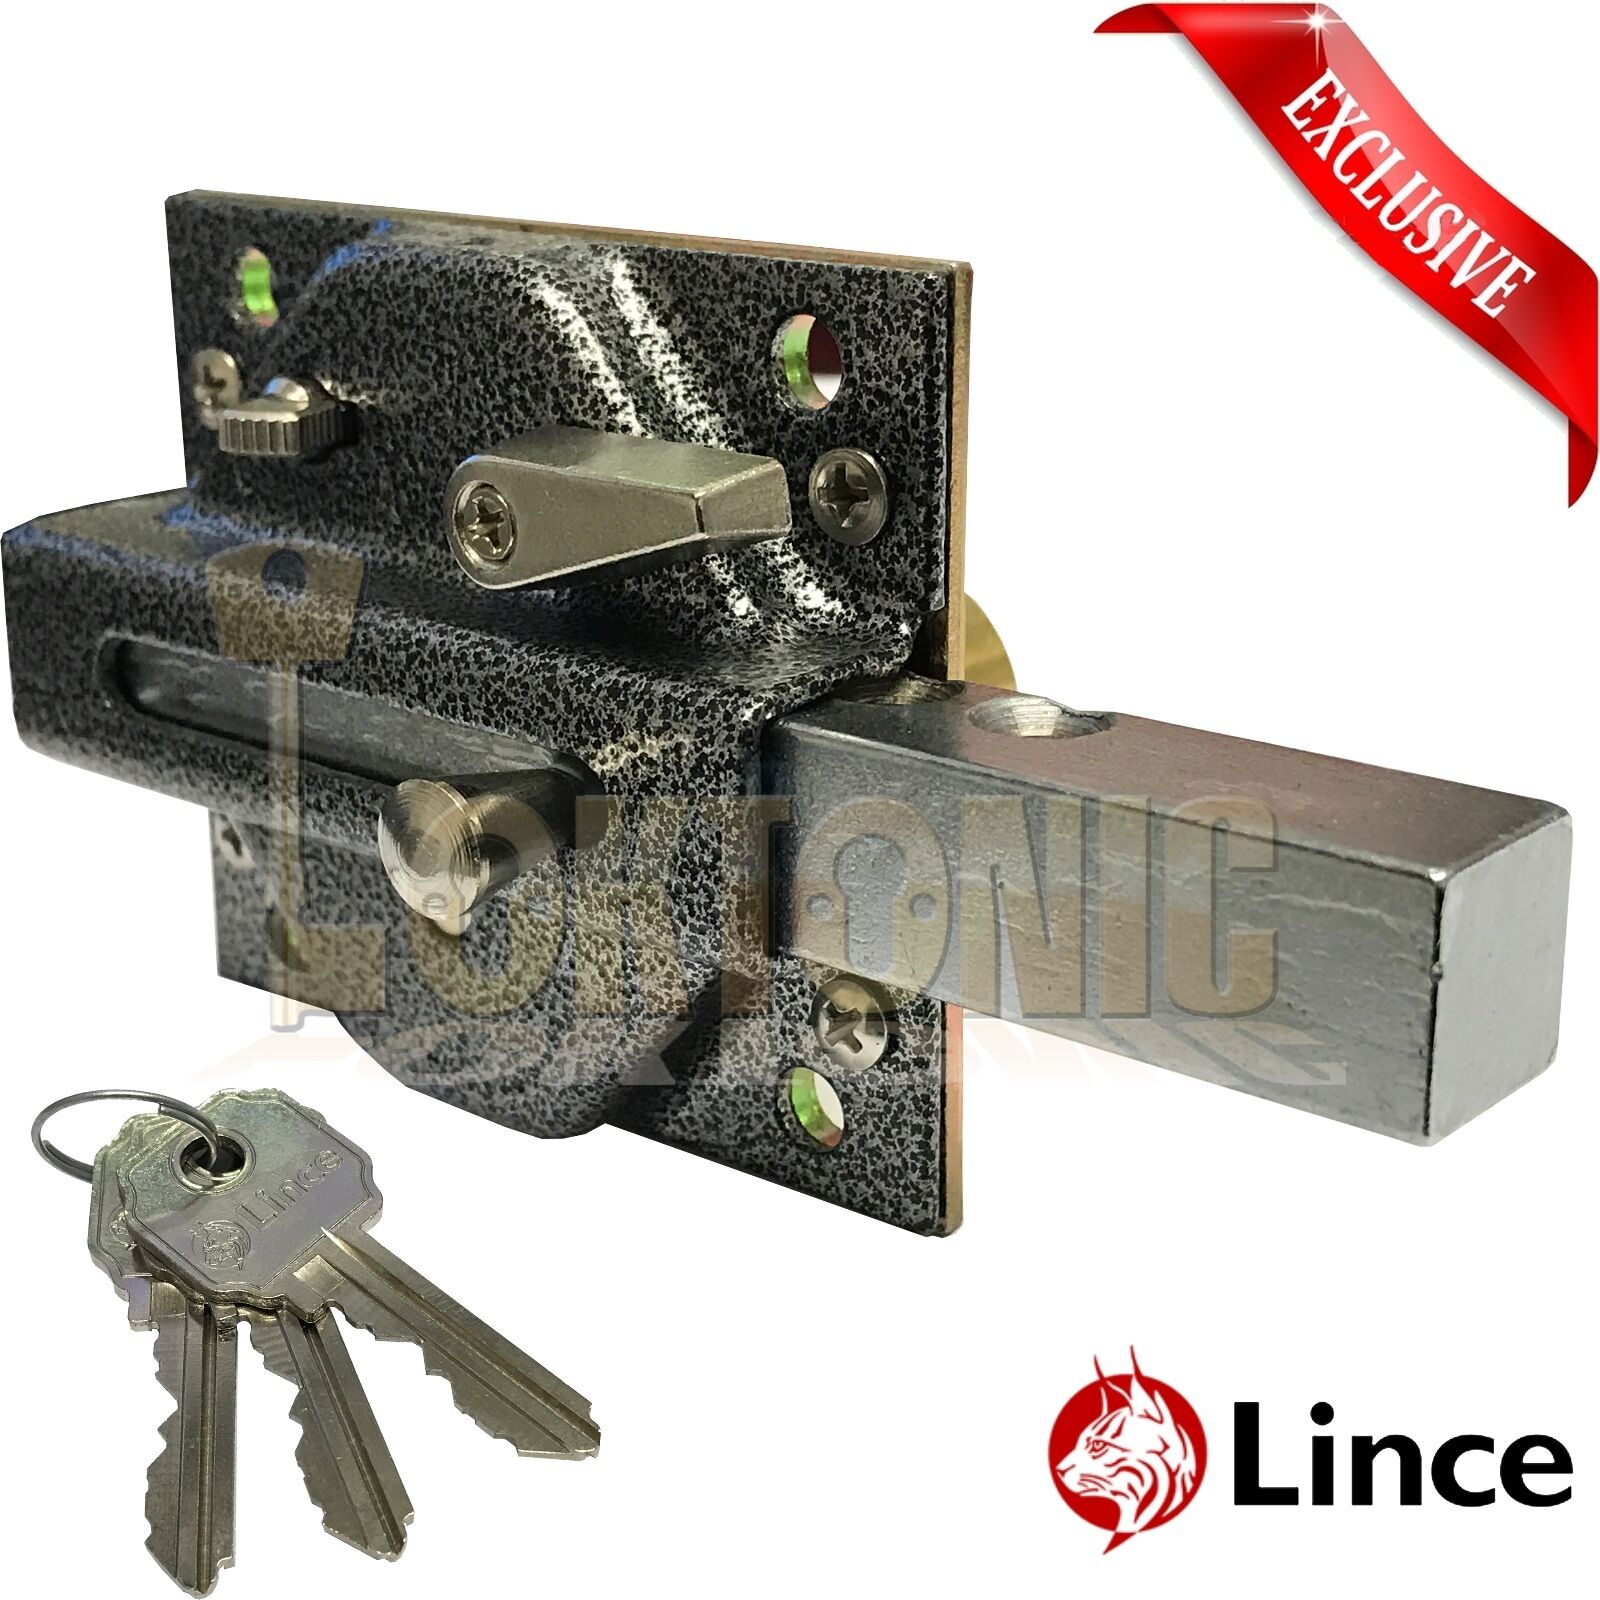 Lince Black Lock High Security Heavy Duty Garden Gate Shed 